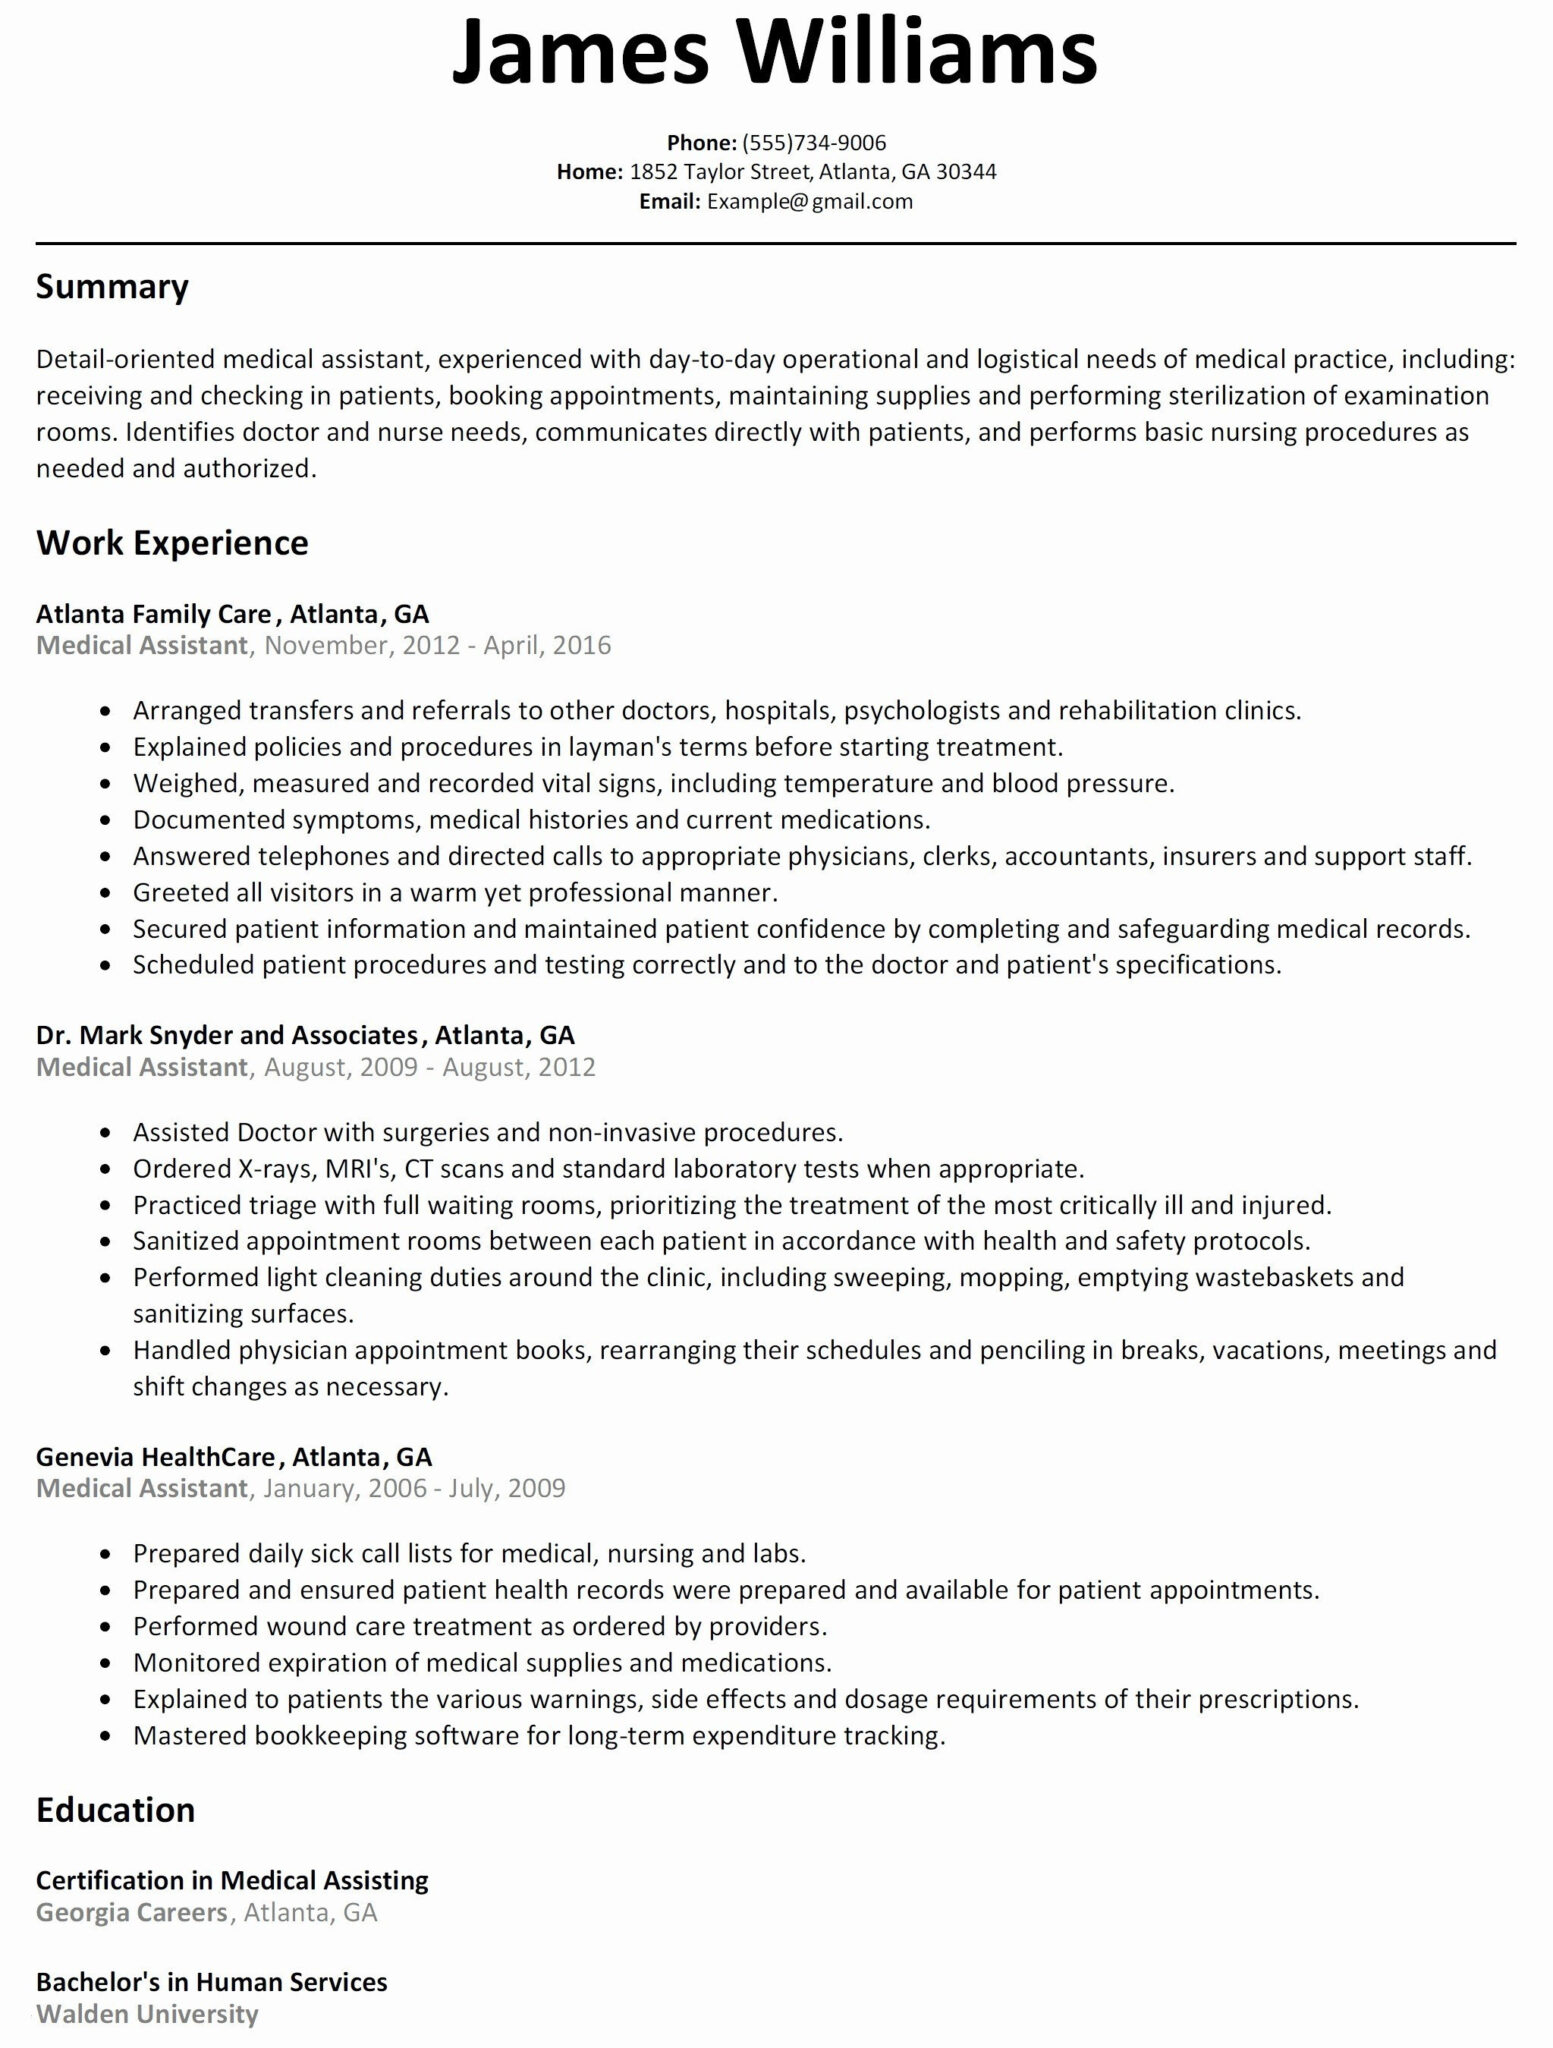 Free Creative Resume Templates Whereveralso Interesting In Regarding Simple Blank Resume Templates For Microsoft Word